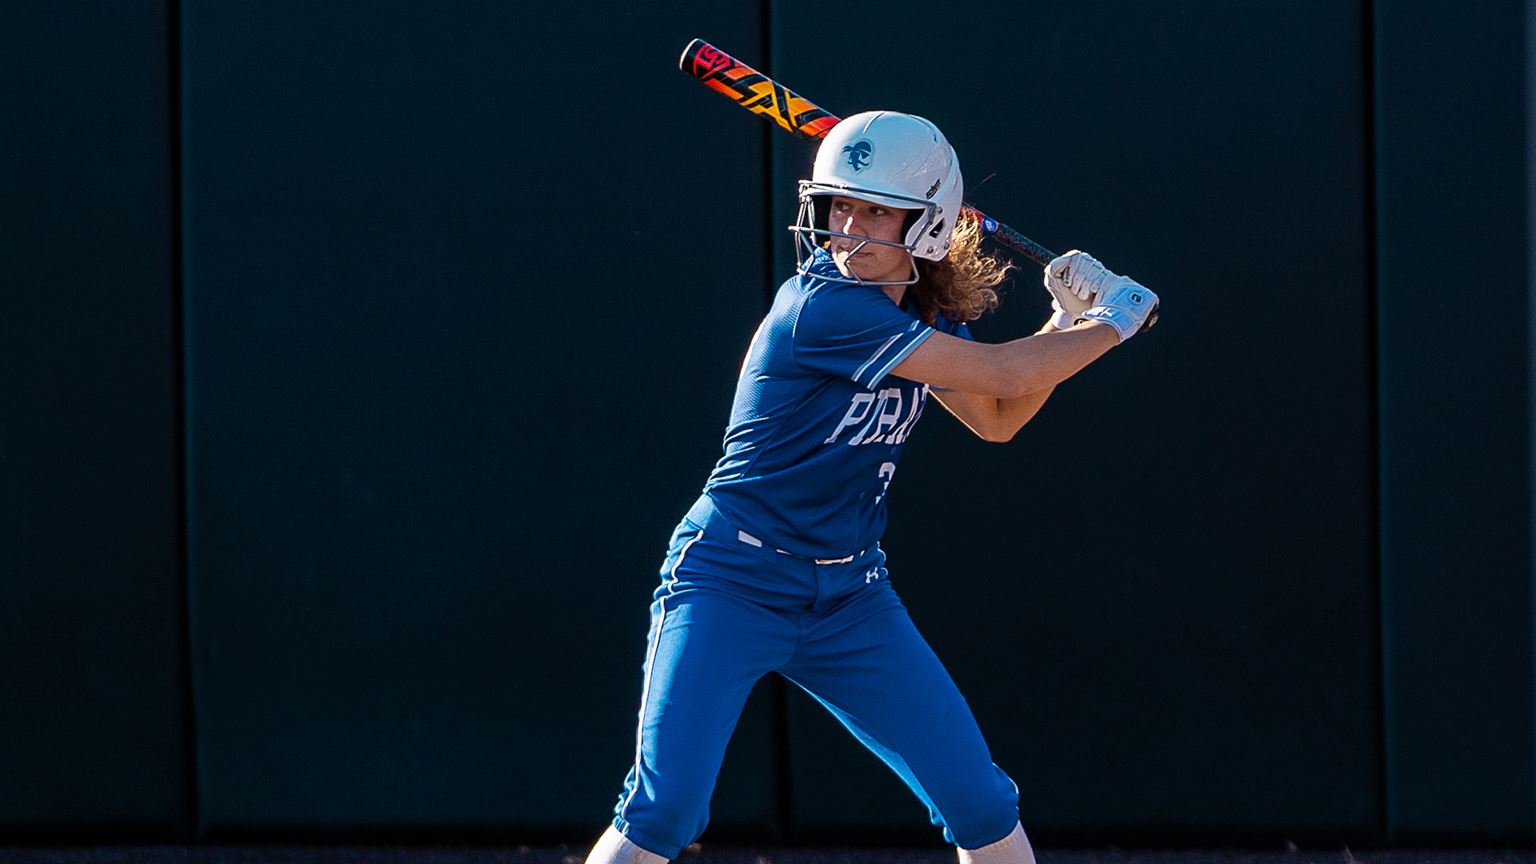 A Seton Hall softball player looks to bat during a game.